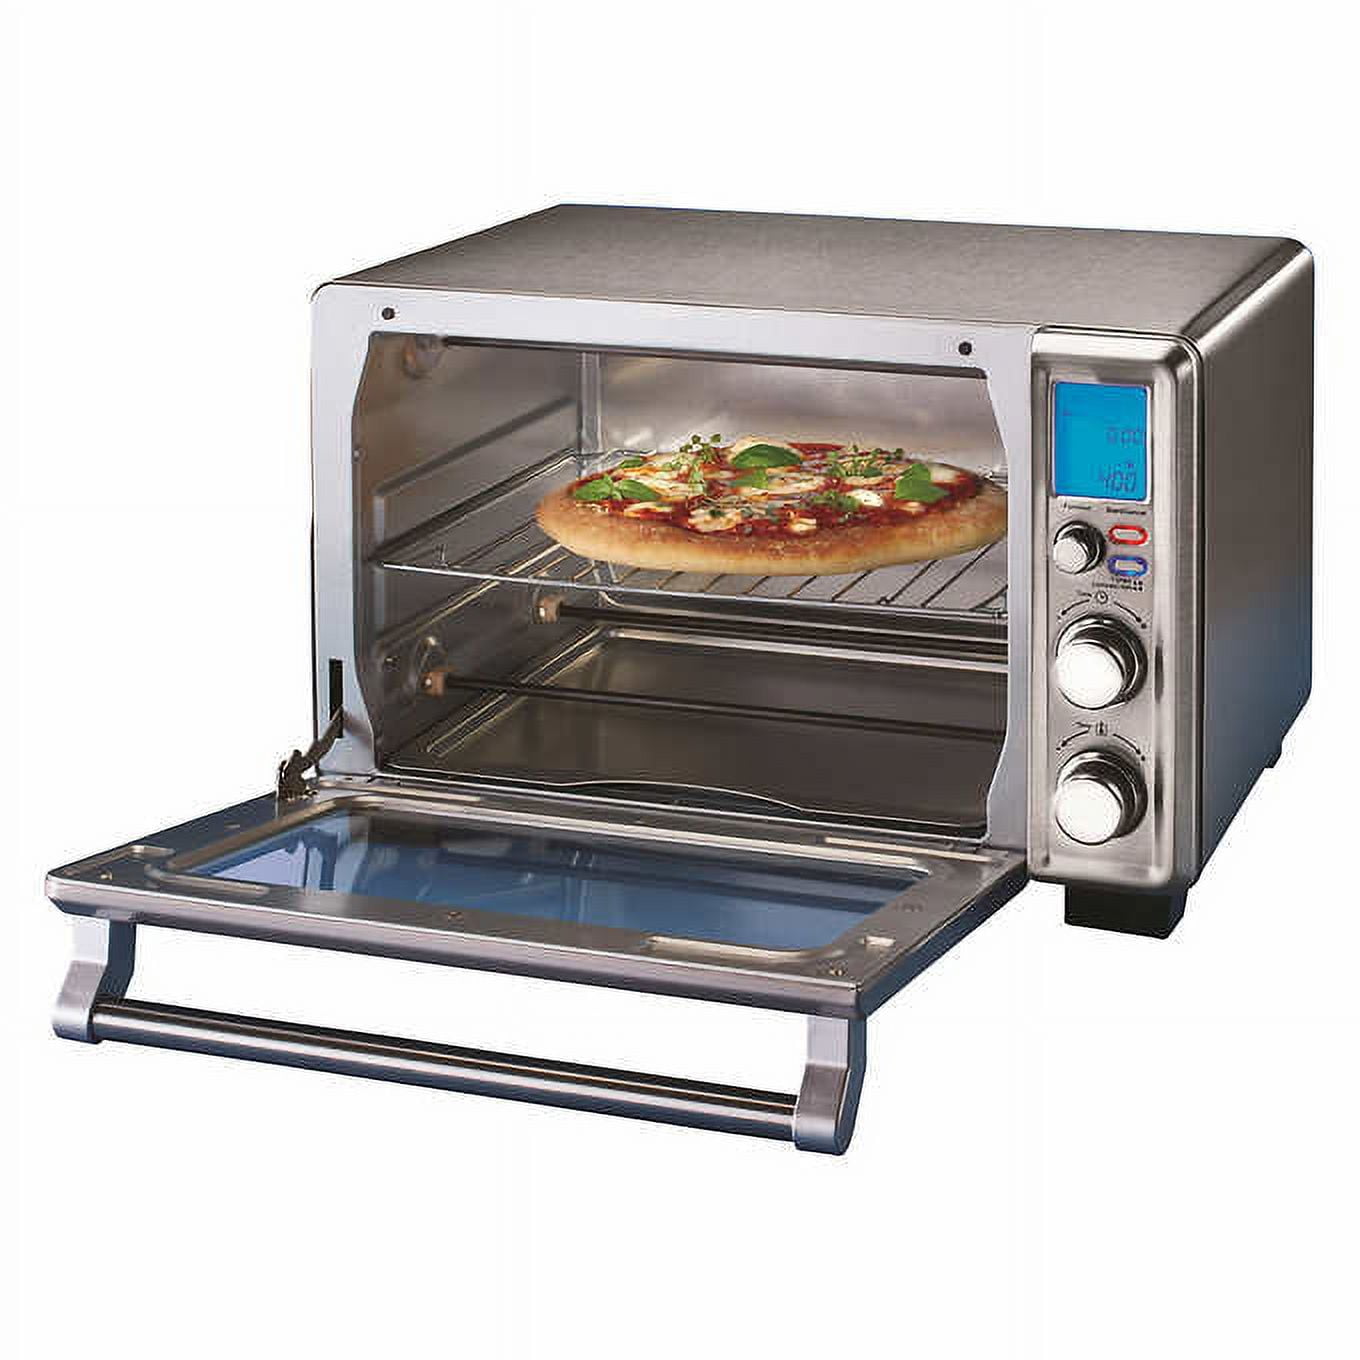 Oster Large Digital Countertop Oven, Brushed Stainless Steel 